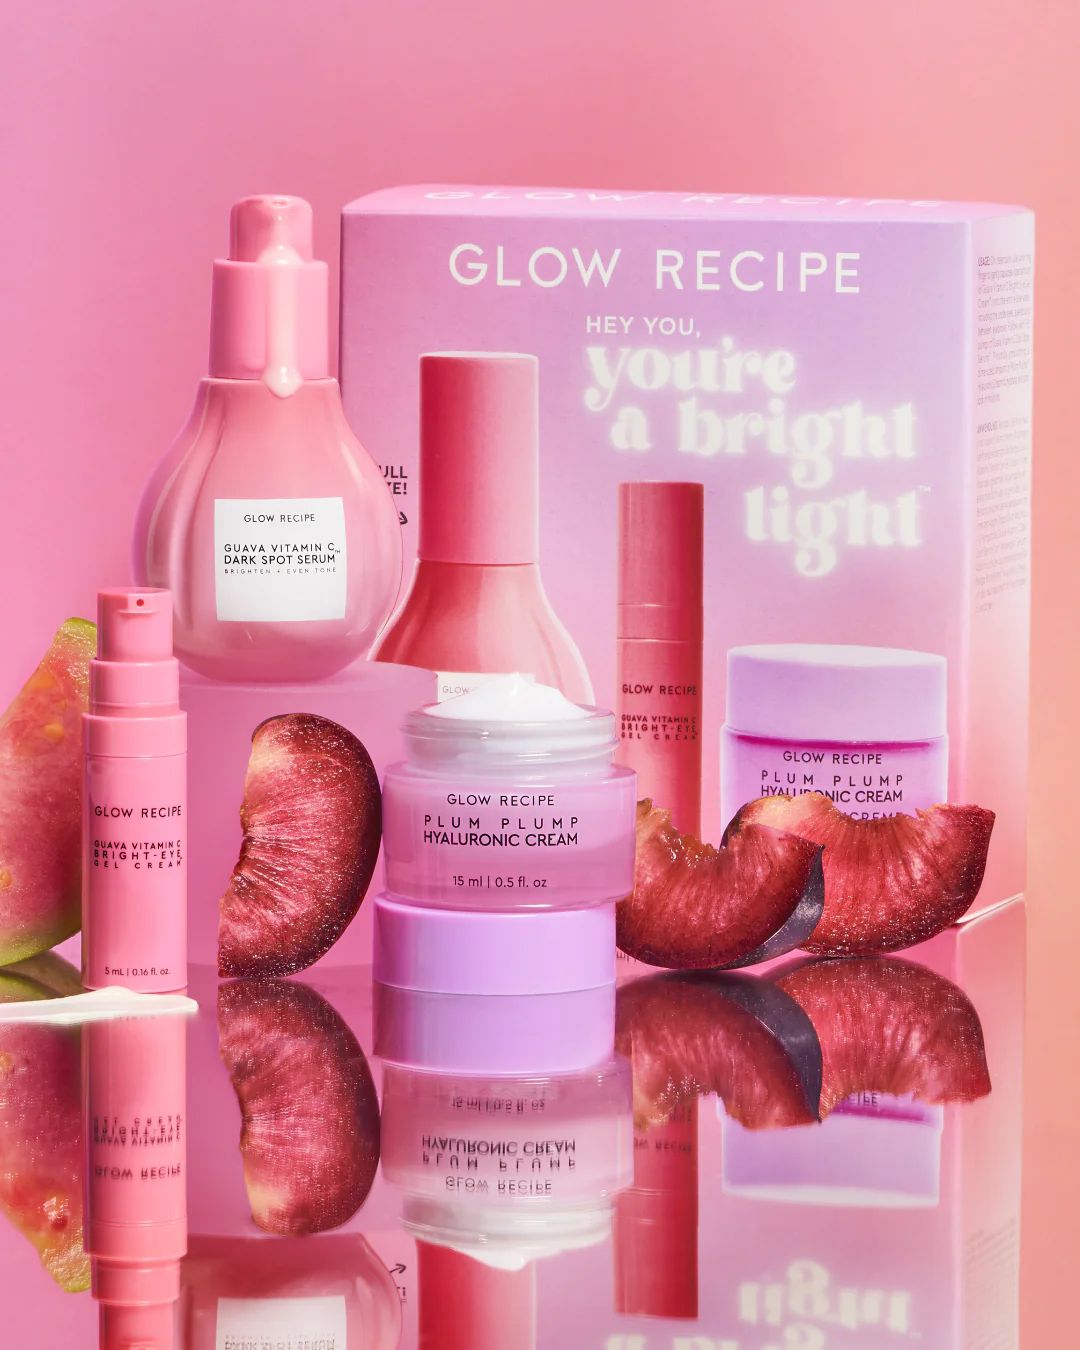 Hey You, You’re a Bright Light ($68 Value) | Glow Recipe